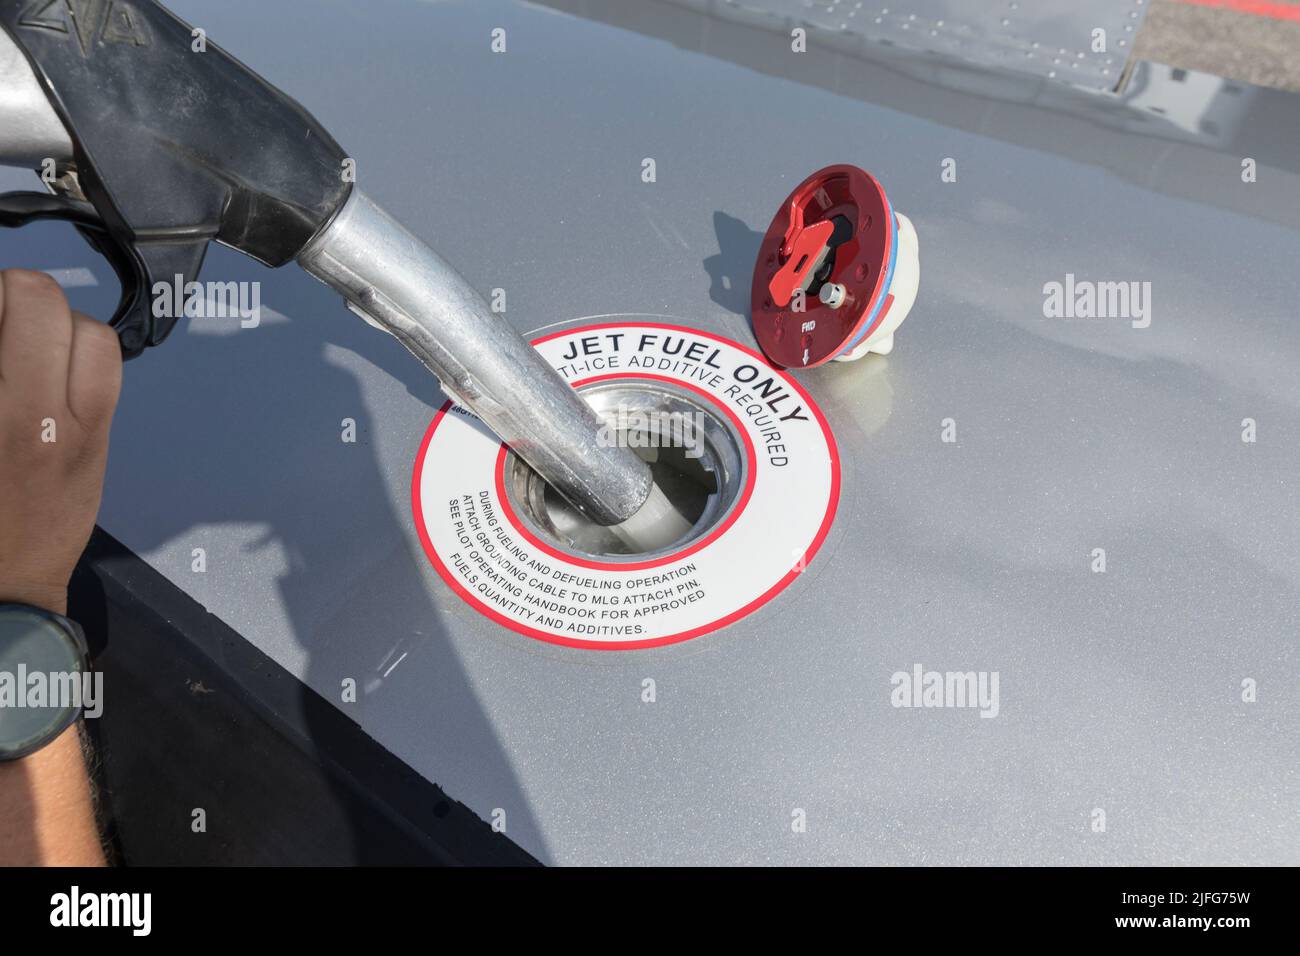 A close-up view of the aircraft's fuel tank, fuel is being filled into the tank. Fuel nozzle filling up aircraft, refueling jet fuel in an aircraft wi Stock Photo